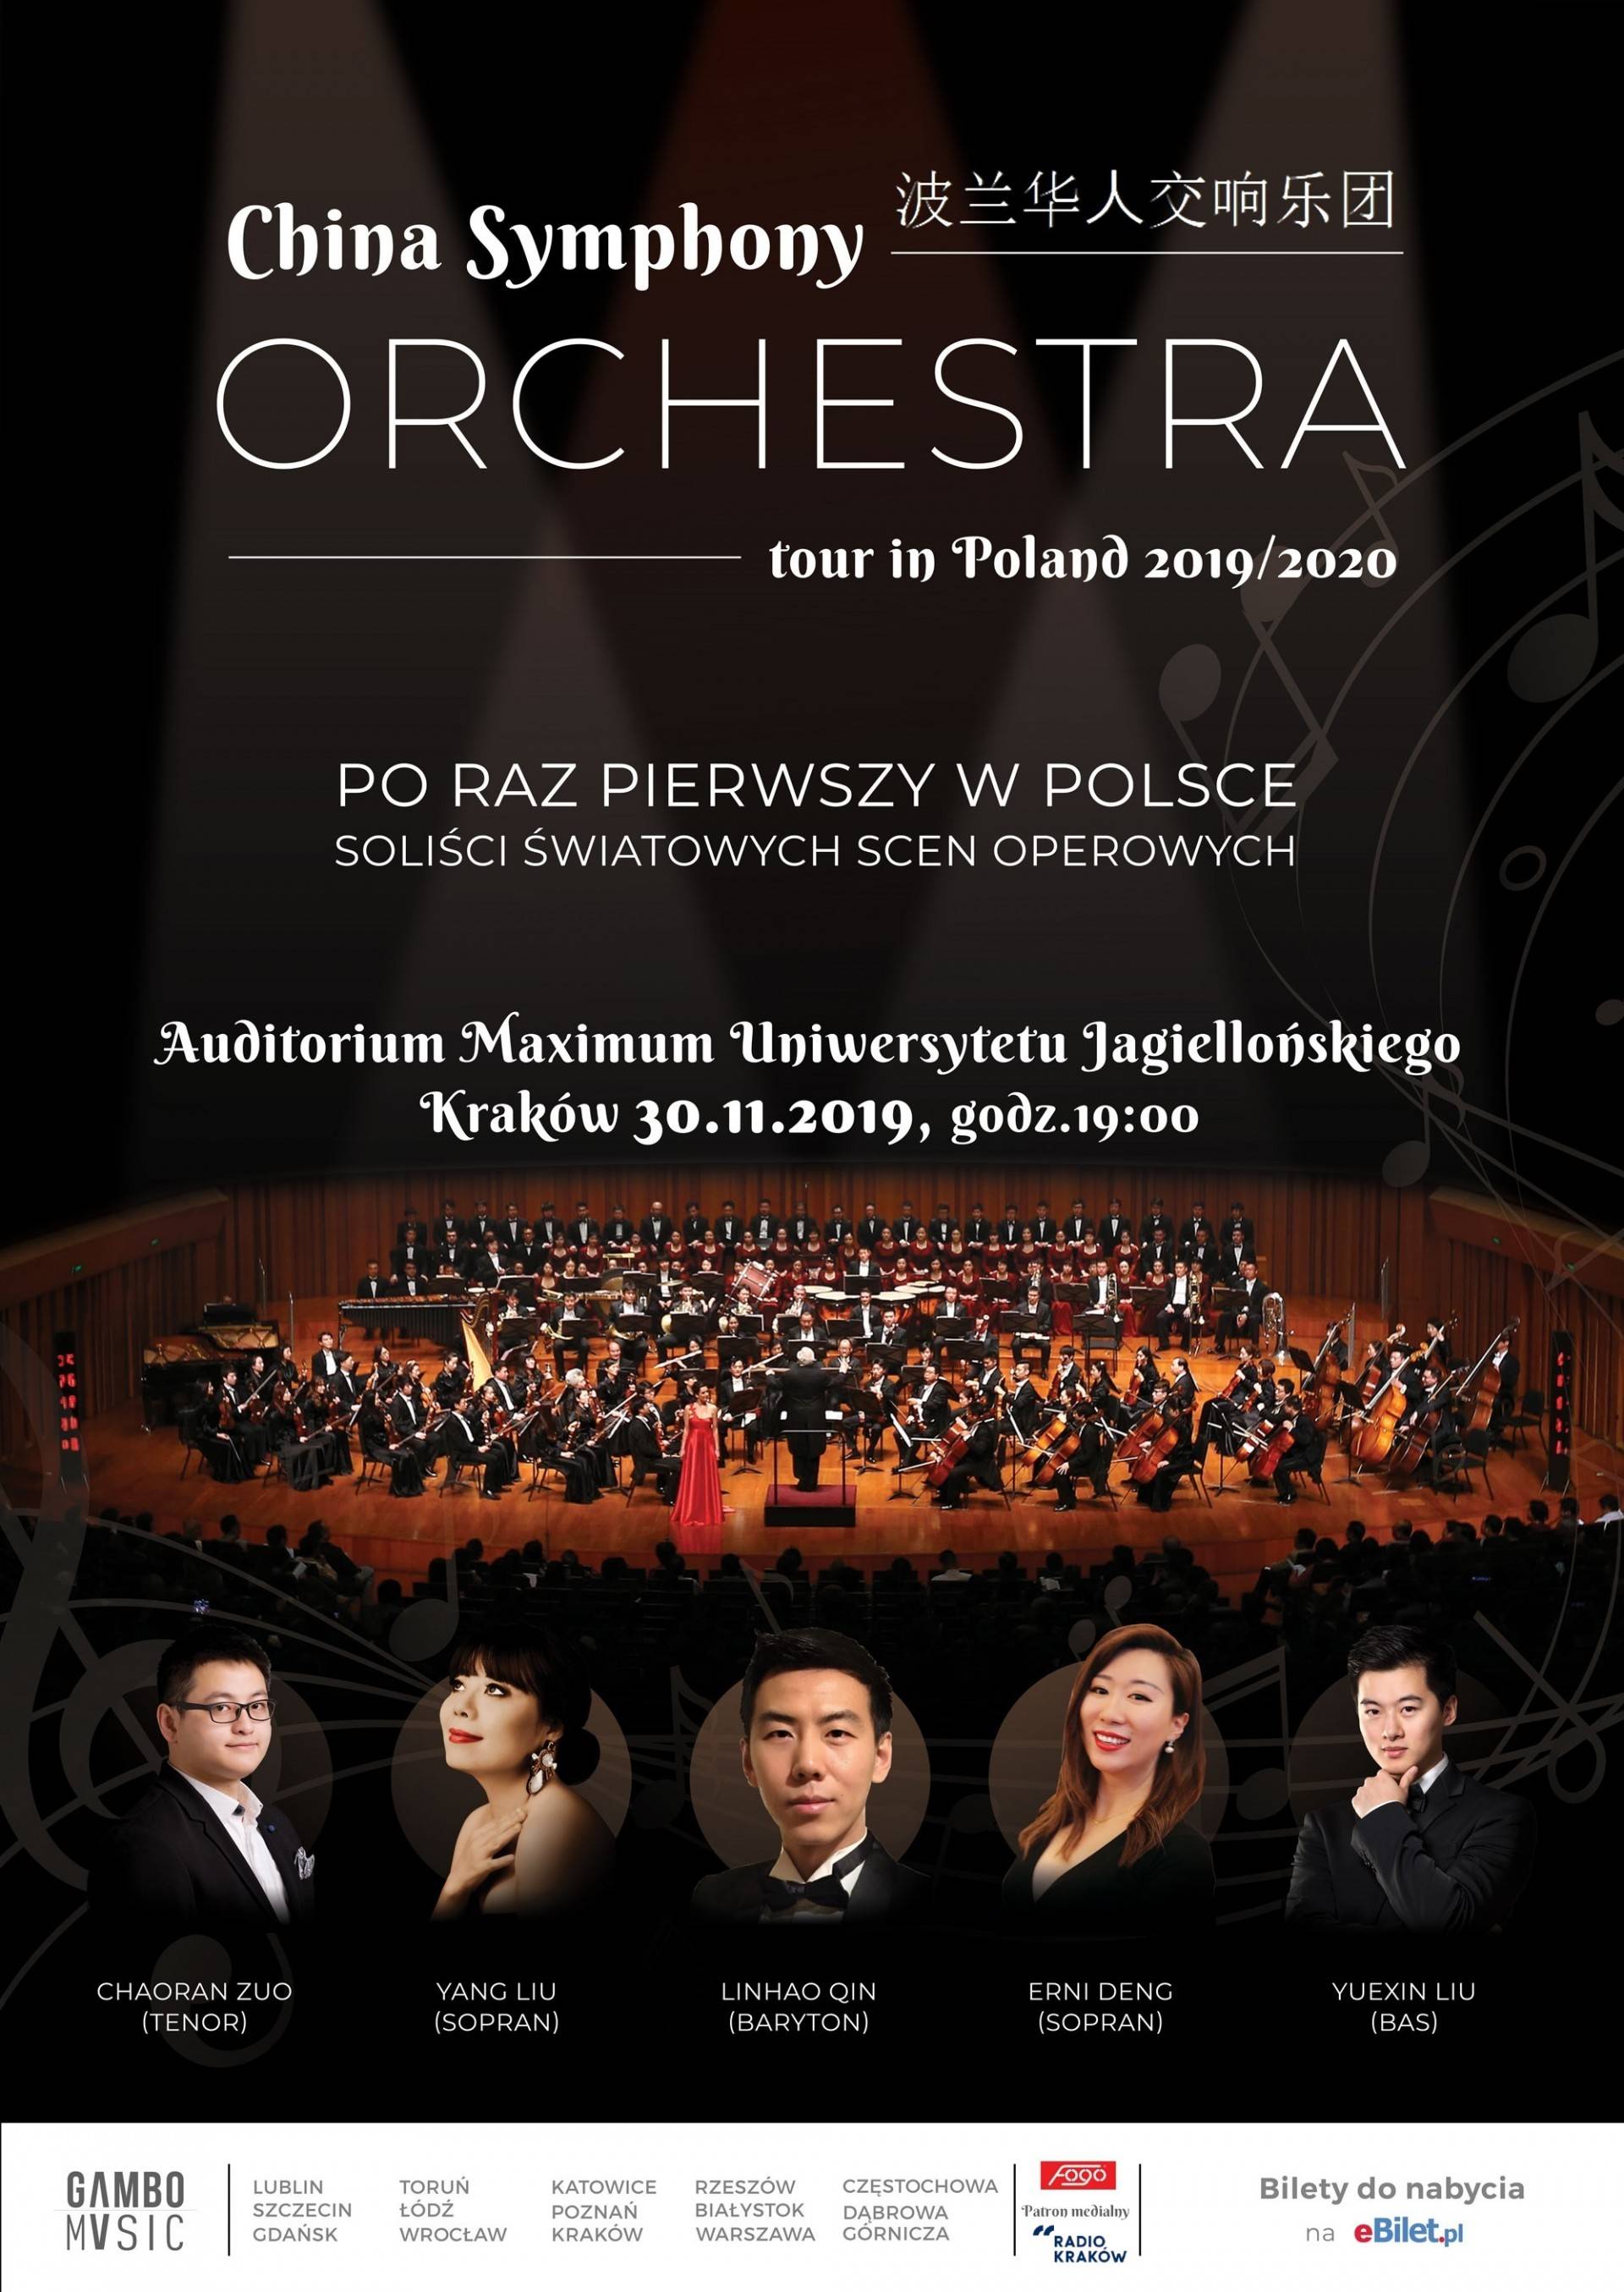 China Symphony Orchestra Tour in Poland